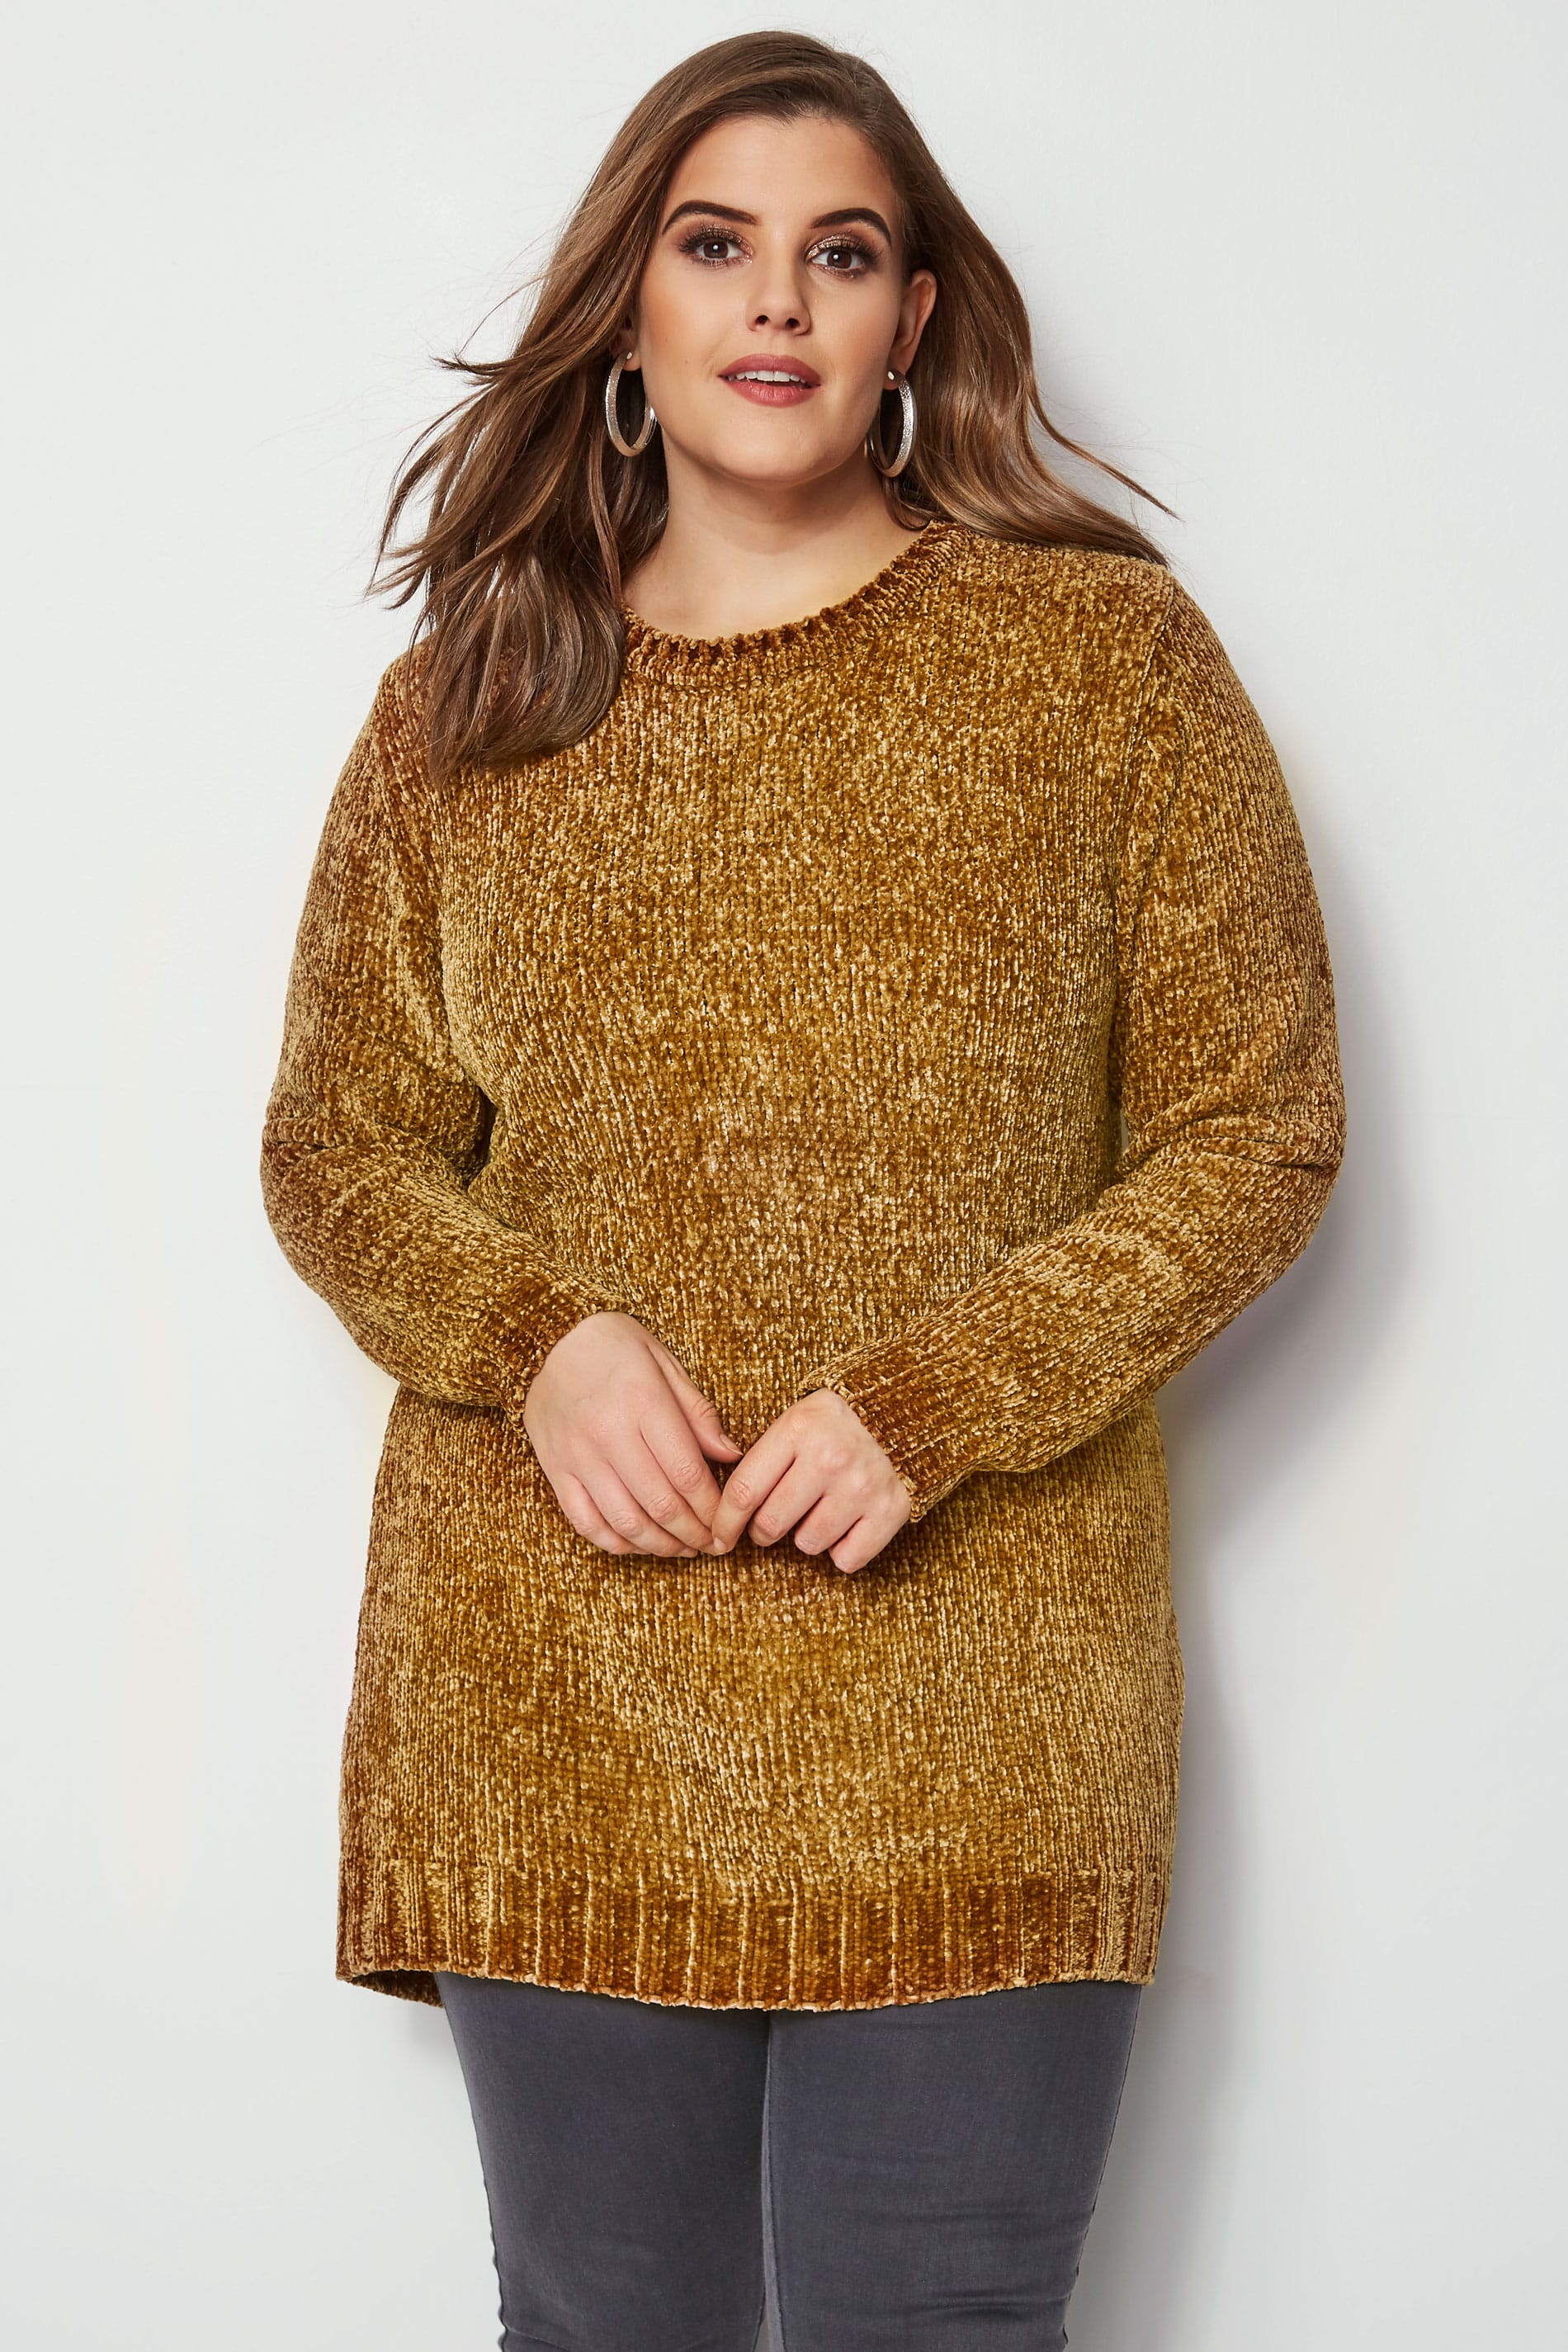 Mustard Chenille Jumper, plus size 16 to 36